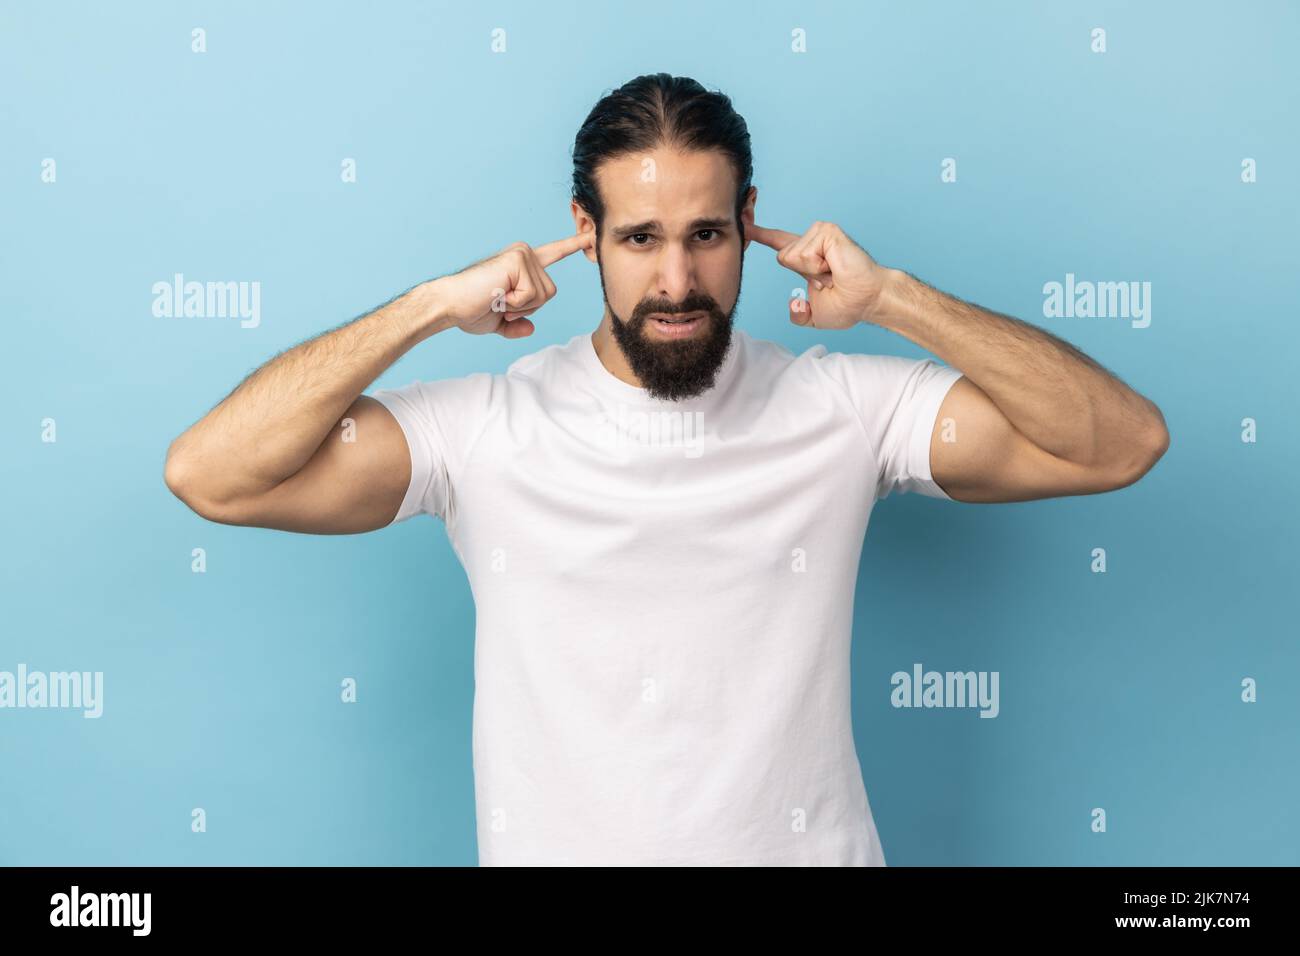 I don't want to here this. Portrait of man with beard wearing white T-shirt standing and holding fingers on his ear, unpleasant sounds. Indoor studio shot isolated on blue background. Stock Photo